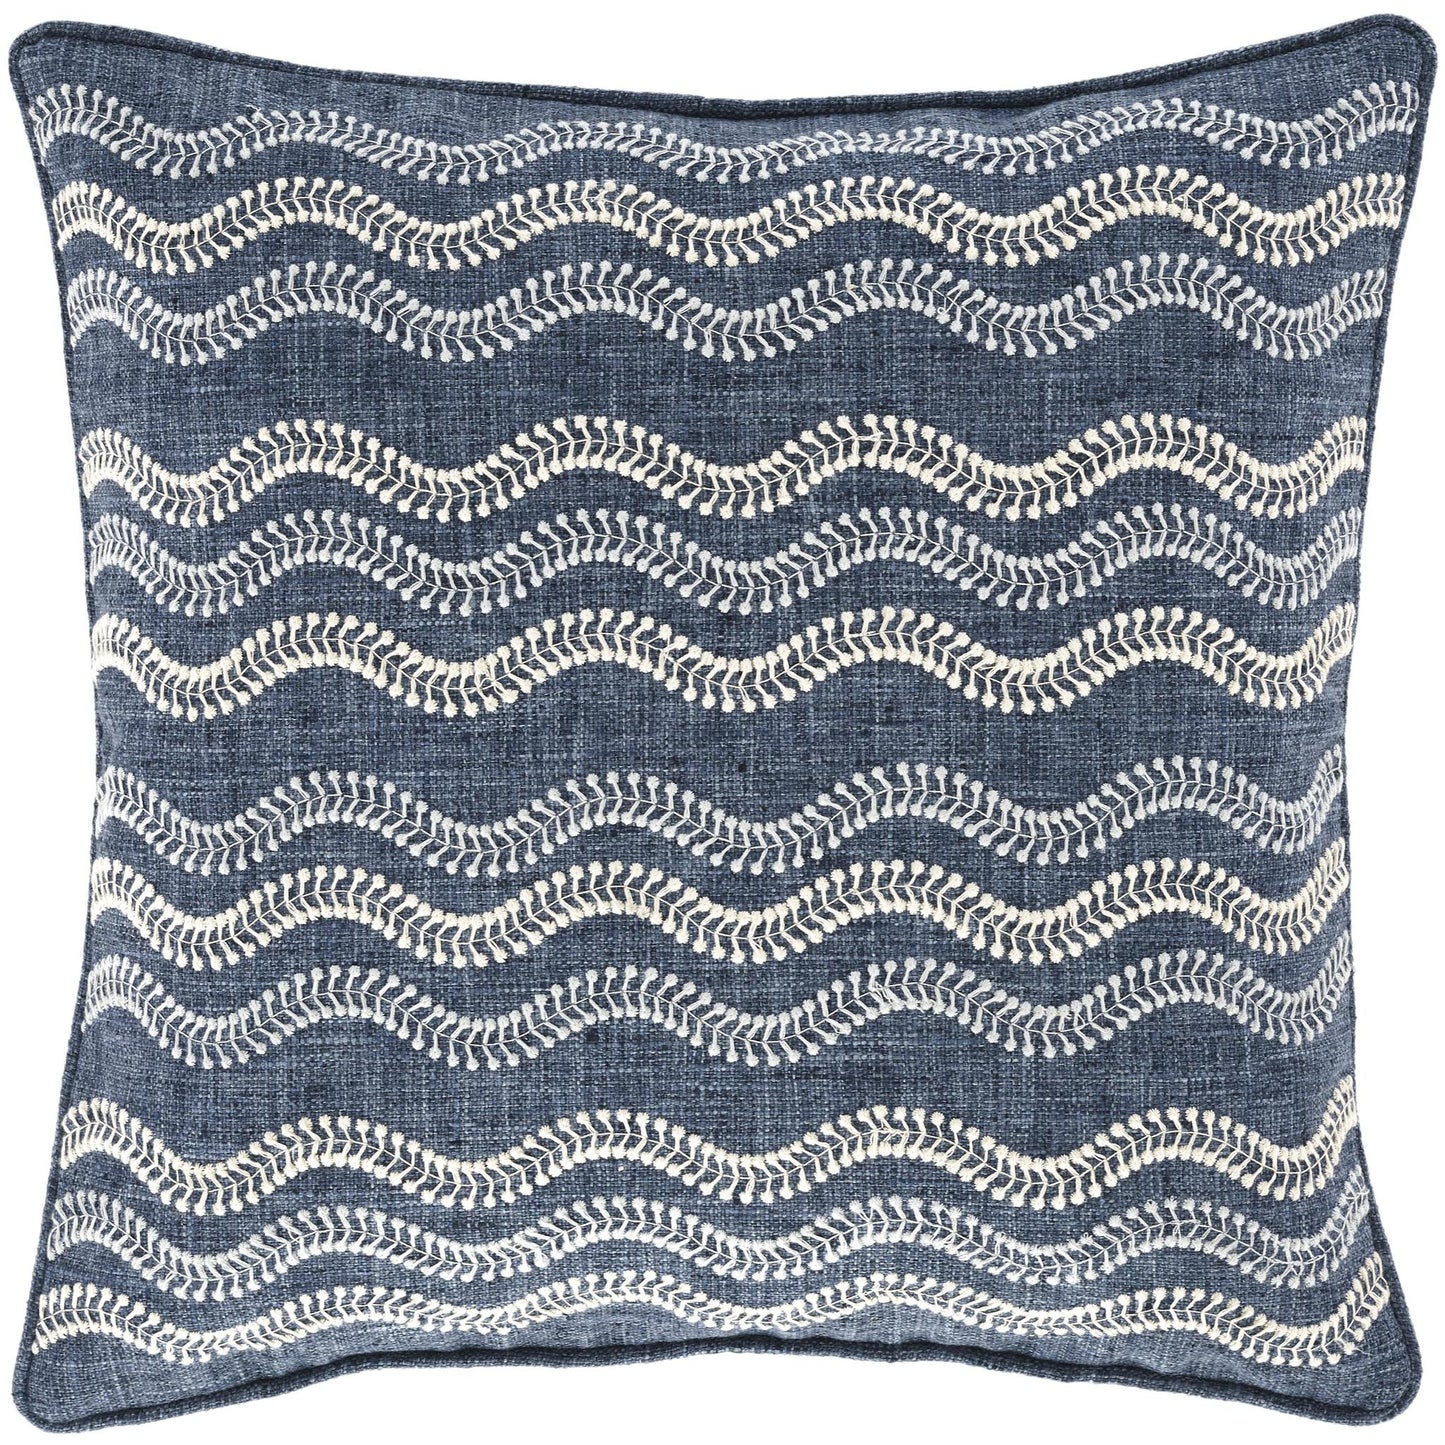 Pillow - "Scout" Embroidered Indigo - Indoor/Outdoor - 20"